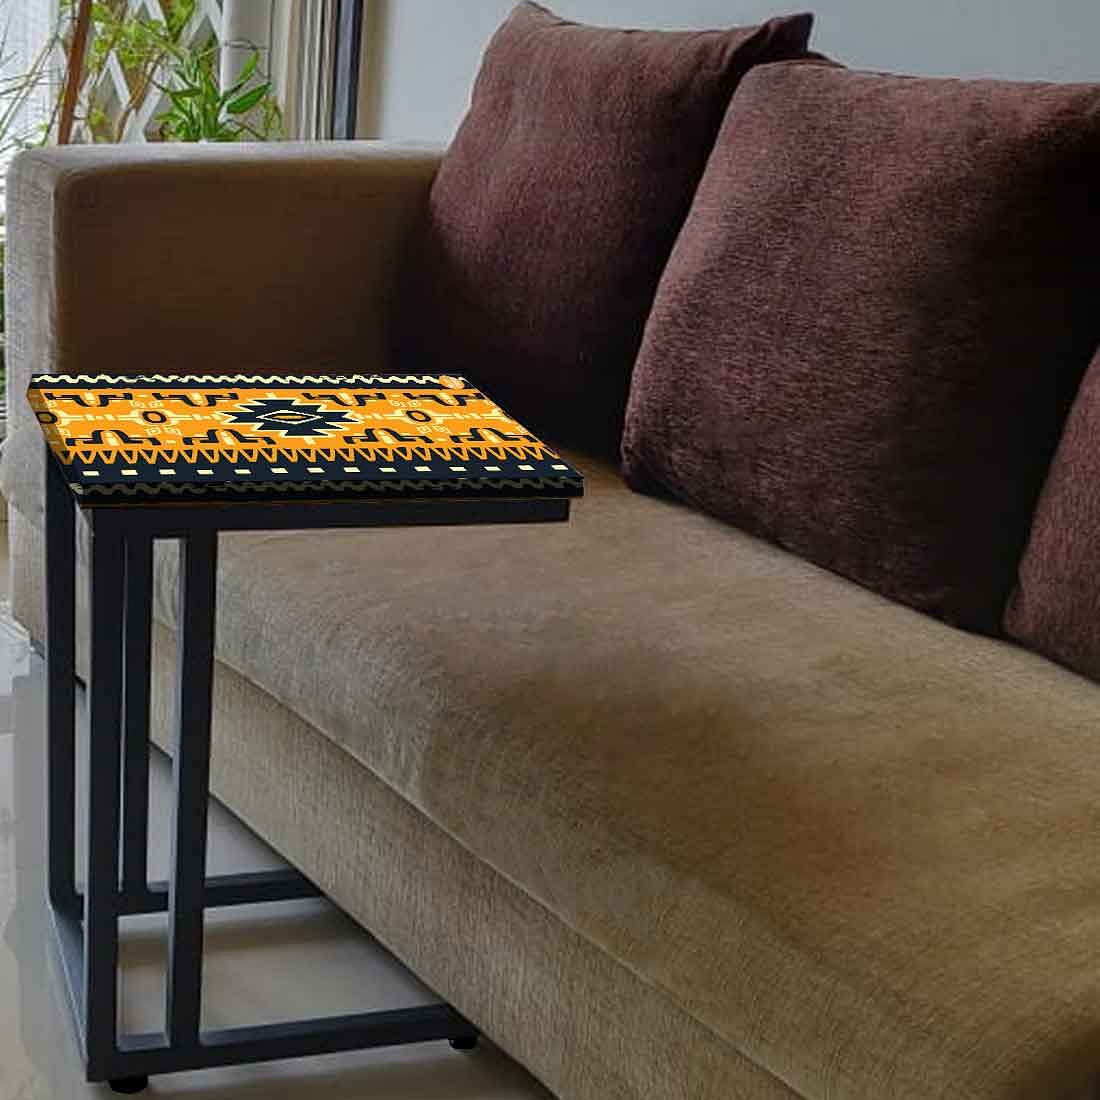 Metal C Shaped Table For Sofa - Beautiful Mexican Pattern Nutcase